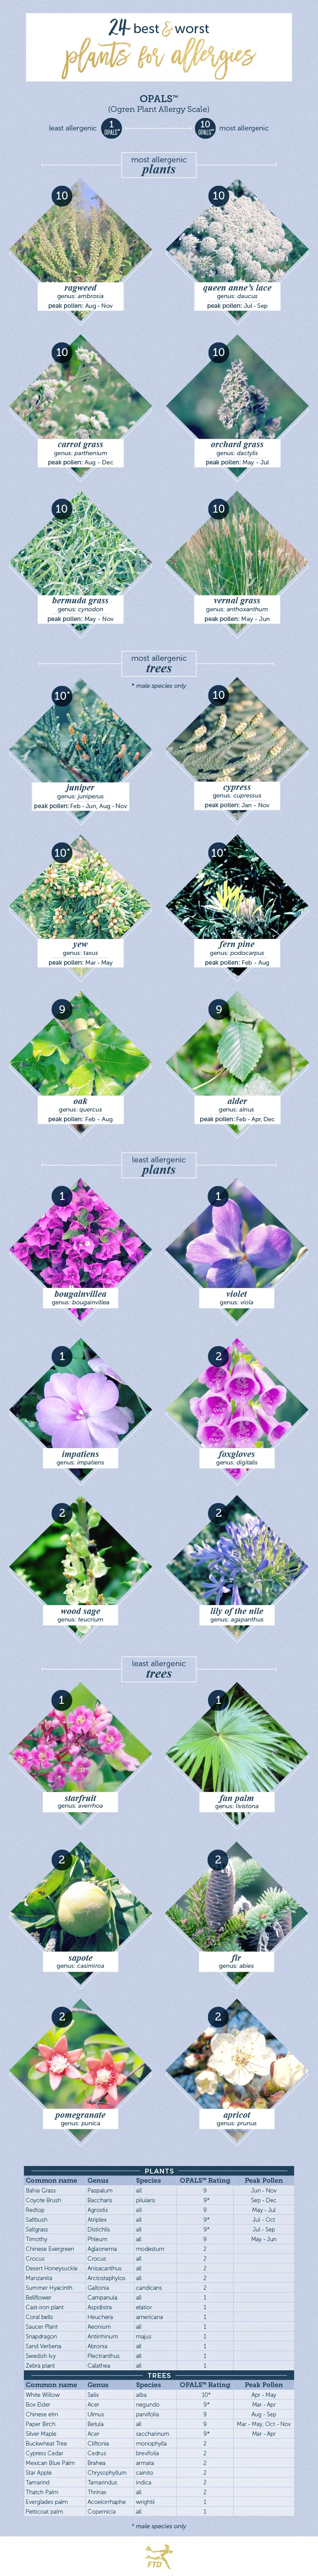 The 24 Best and Worst Plants for Allergies